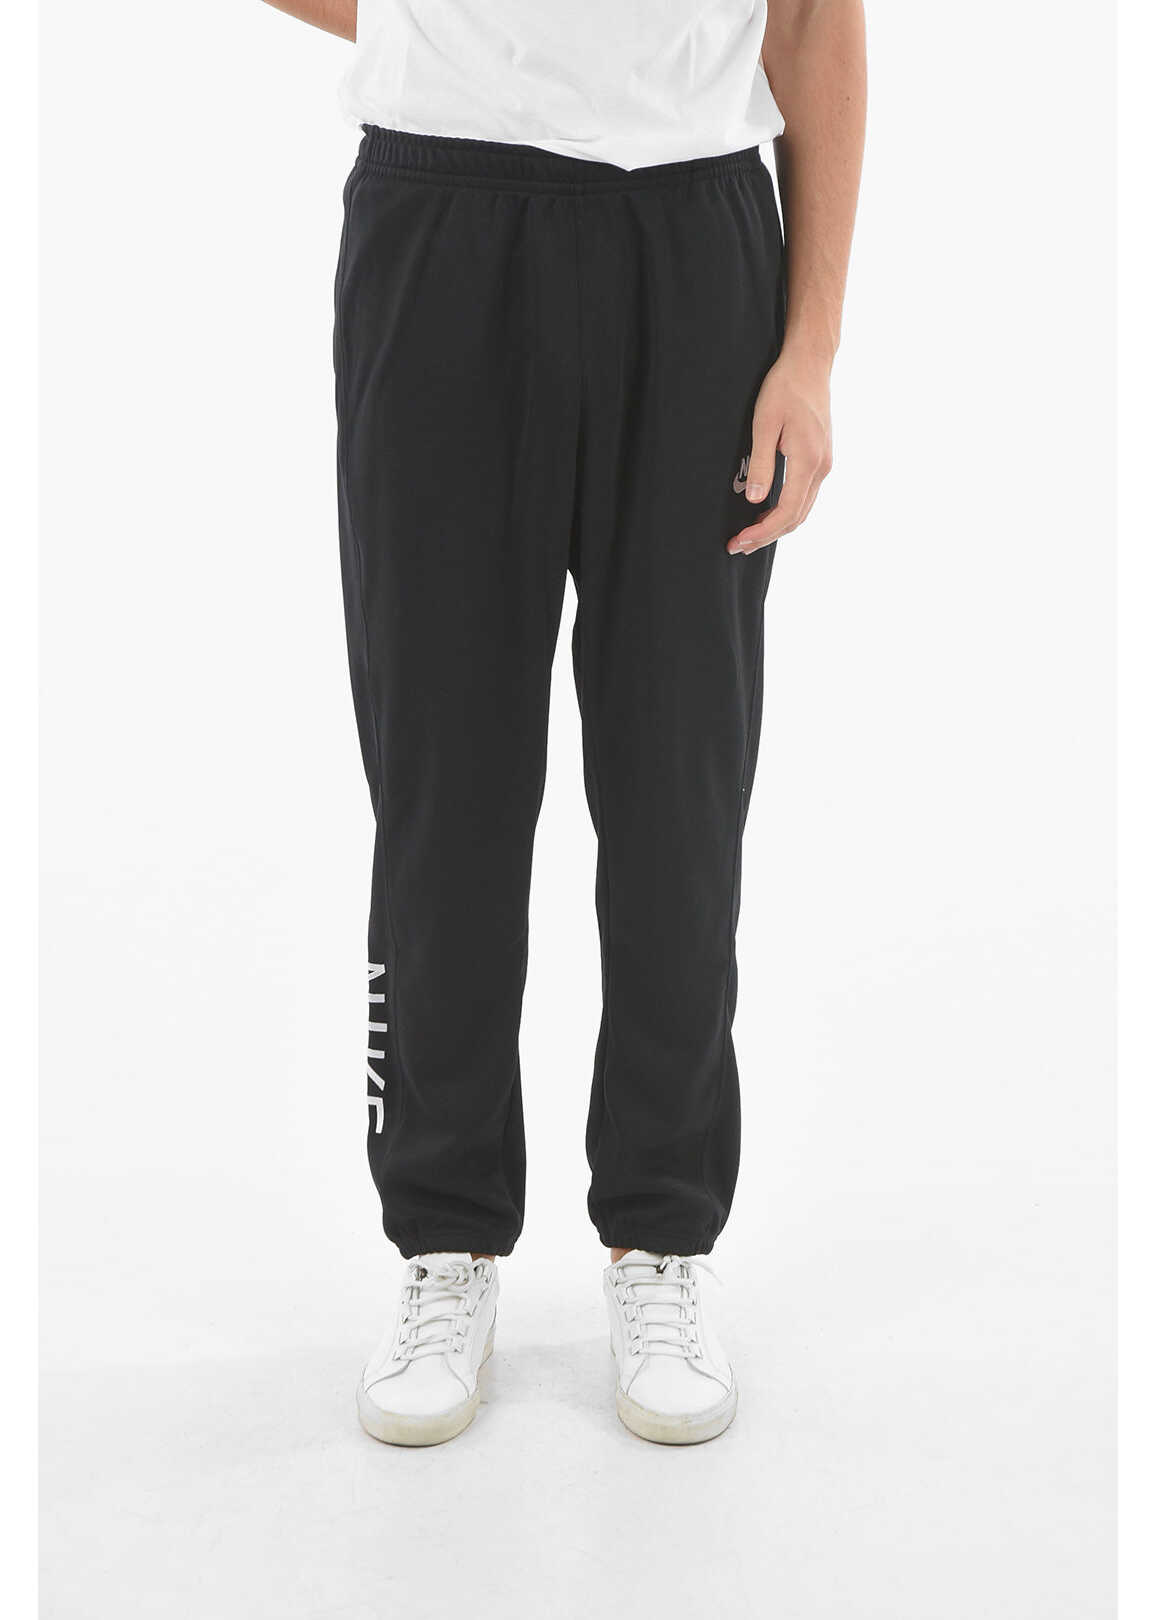 Nike 2 Pockets Joggers With Embroidery Logo Black